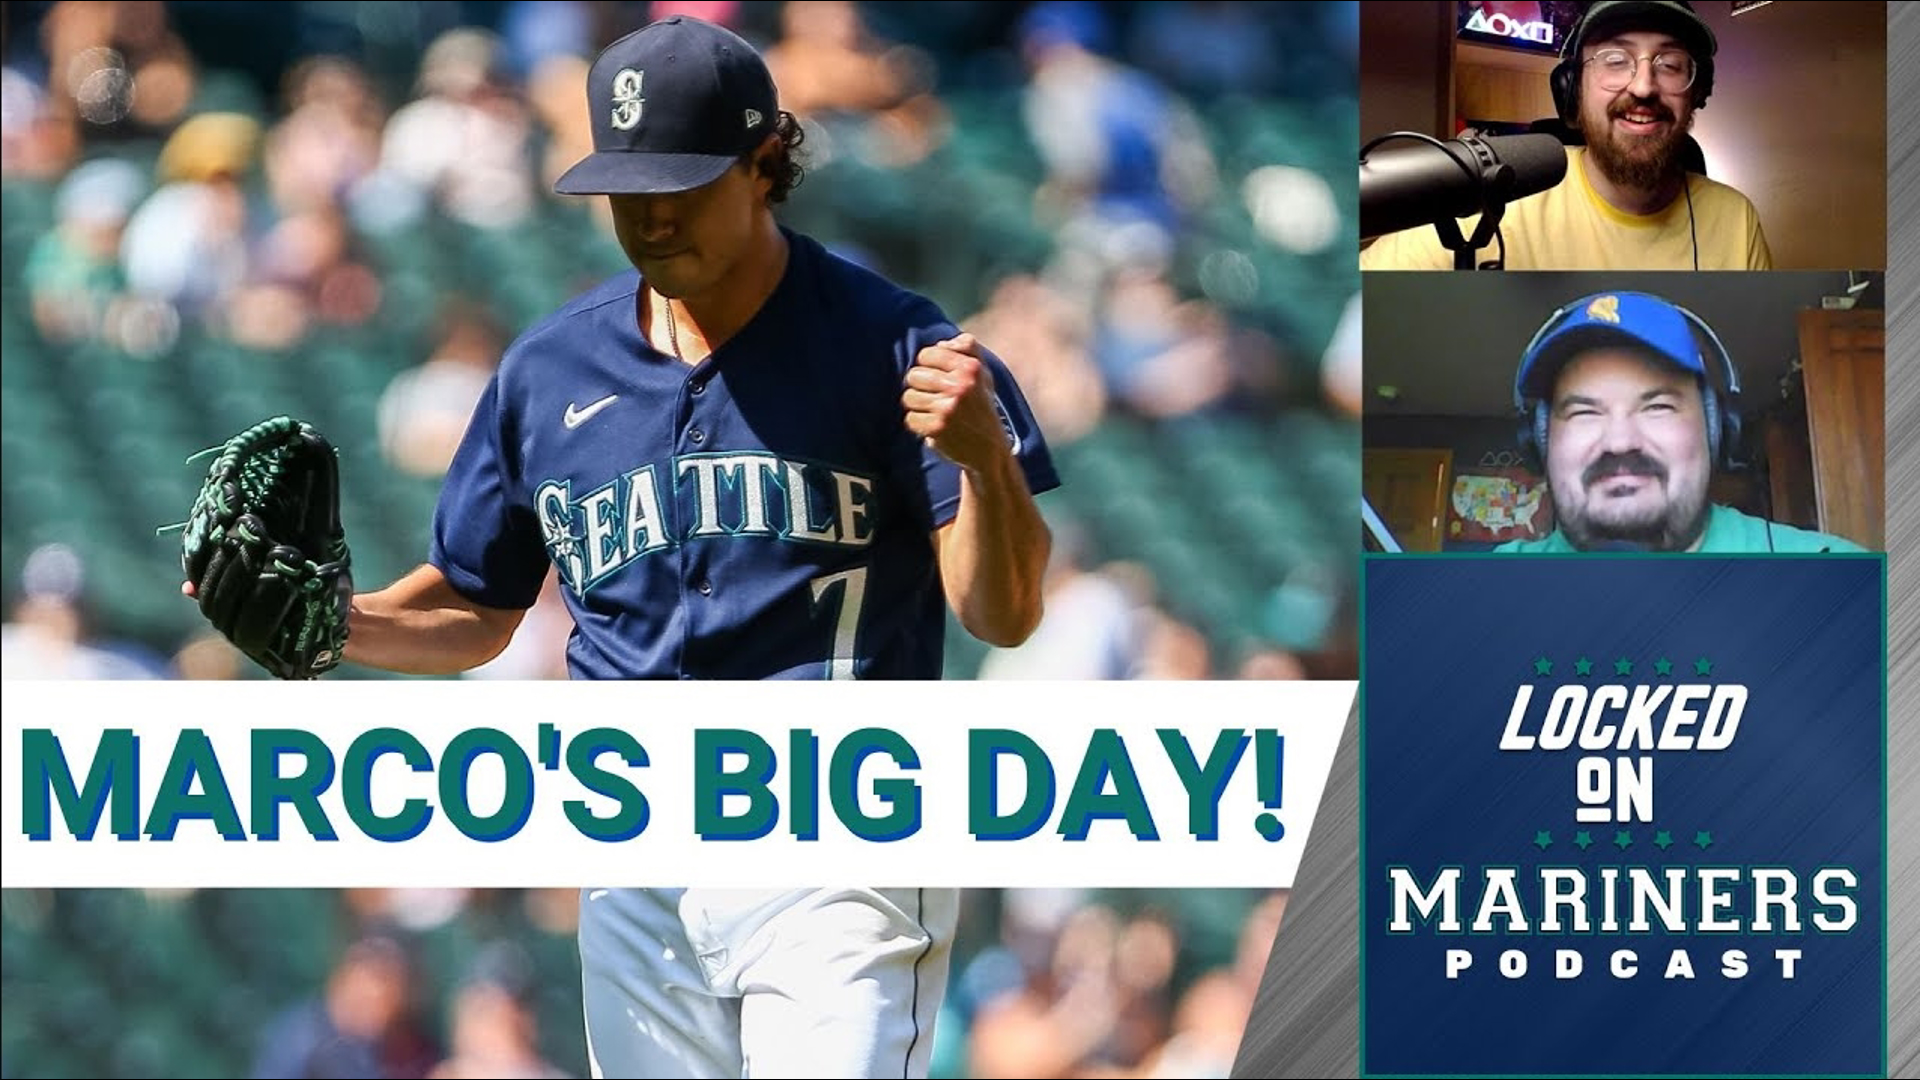 Seattle Mariners beat Cleveland, 3-1! Marco Gonzales, Mitch